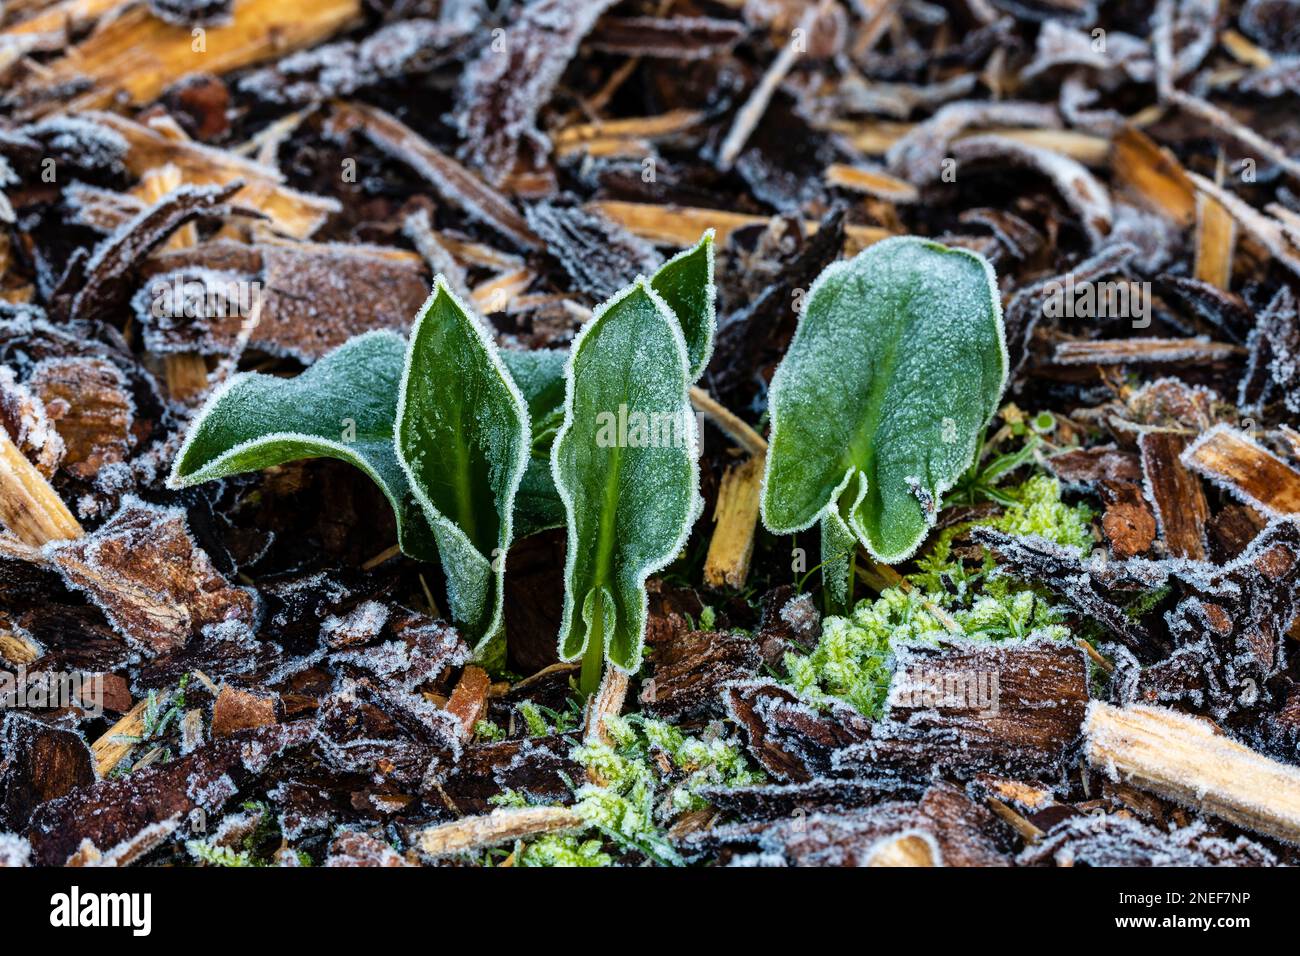 Arum creticum, leaves emerging in January and covered in frost.  Family Araceae Stock Photo